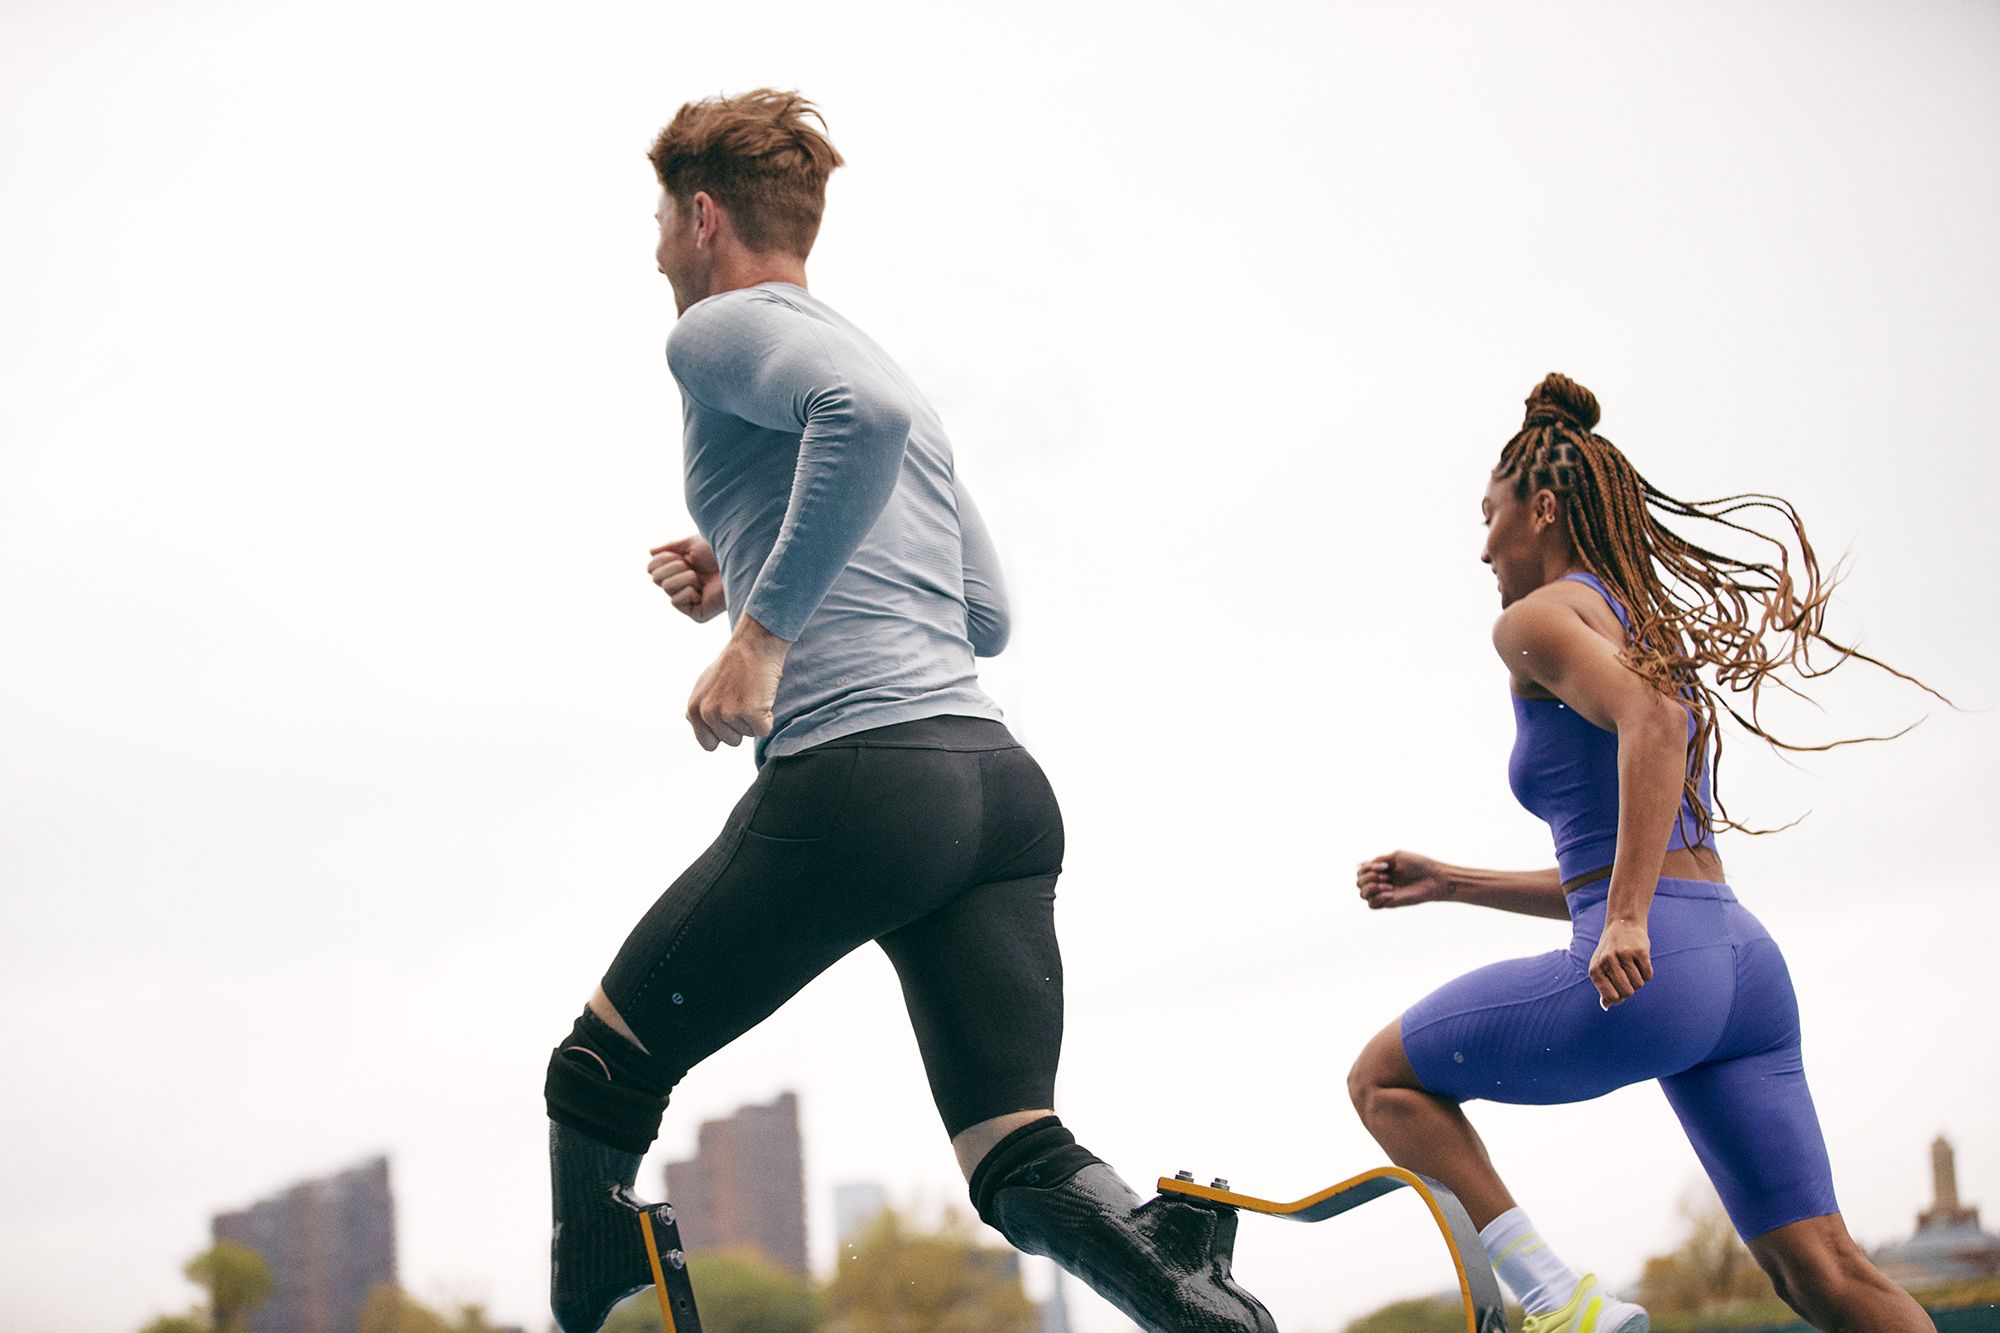 Lululemon's New SenseKnit Collection Is Made for Running Free